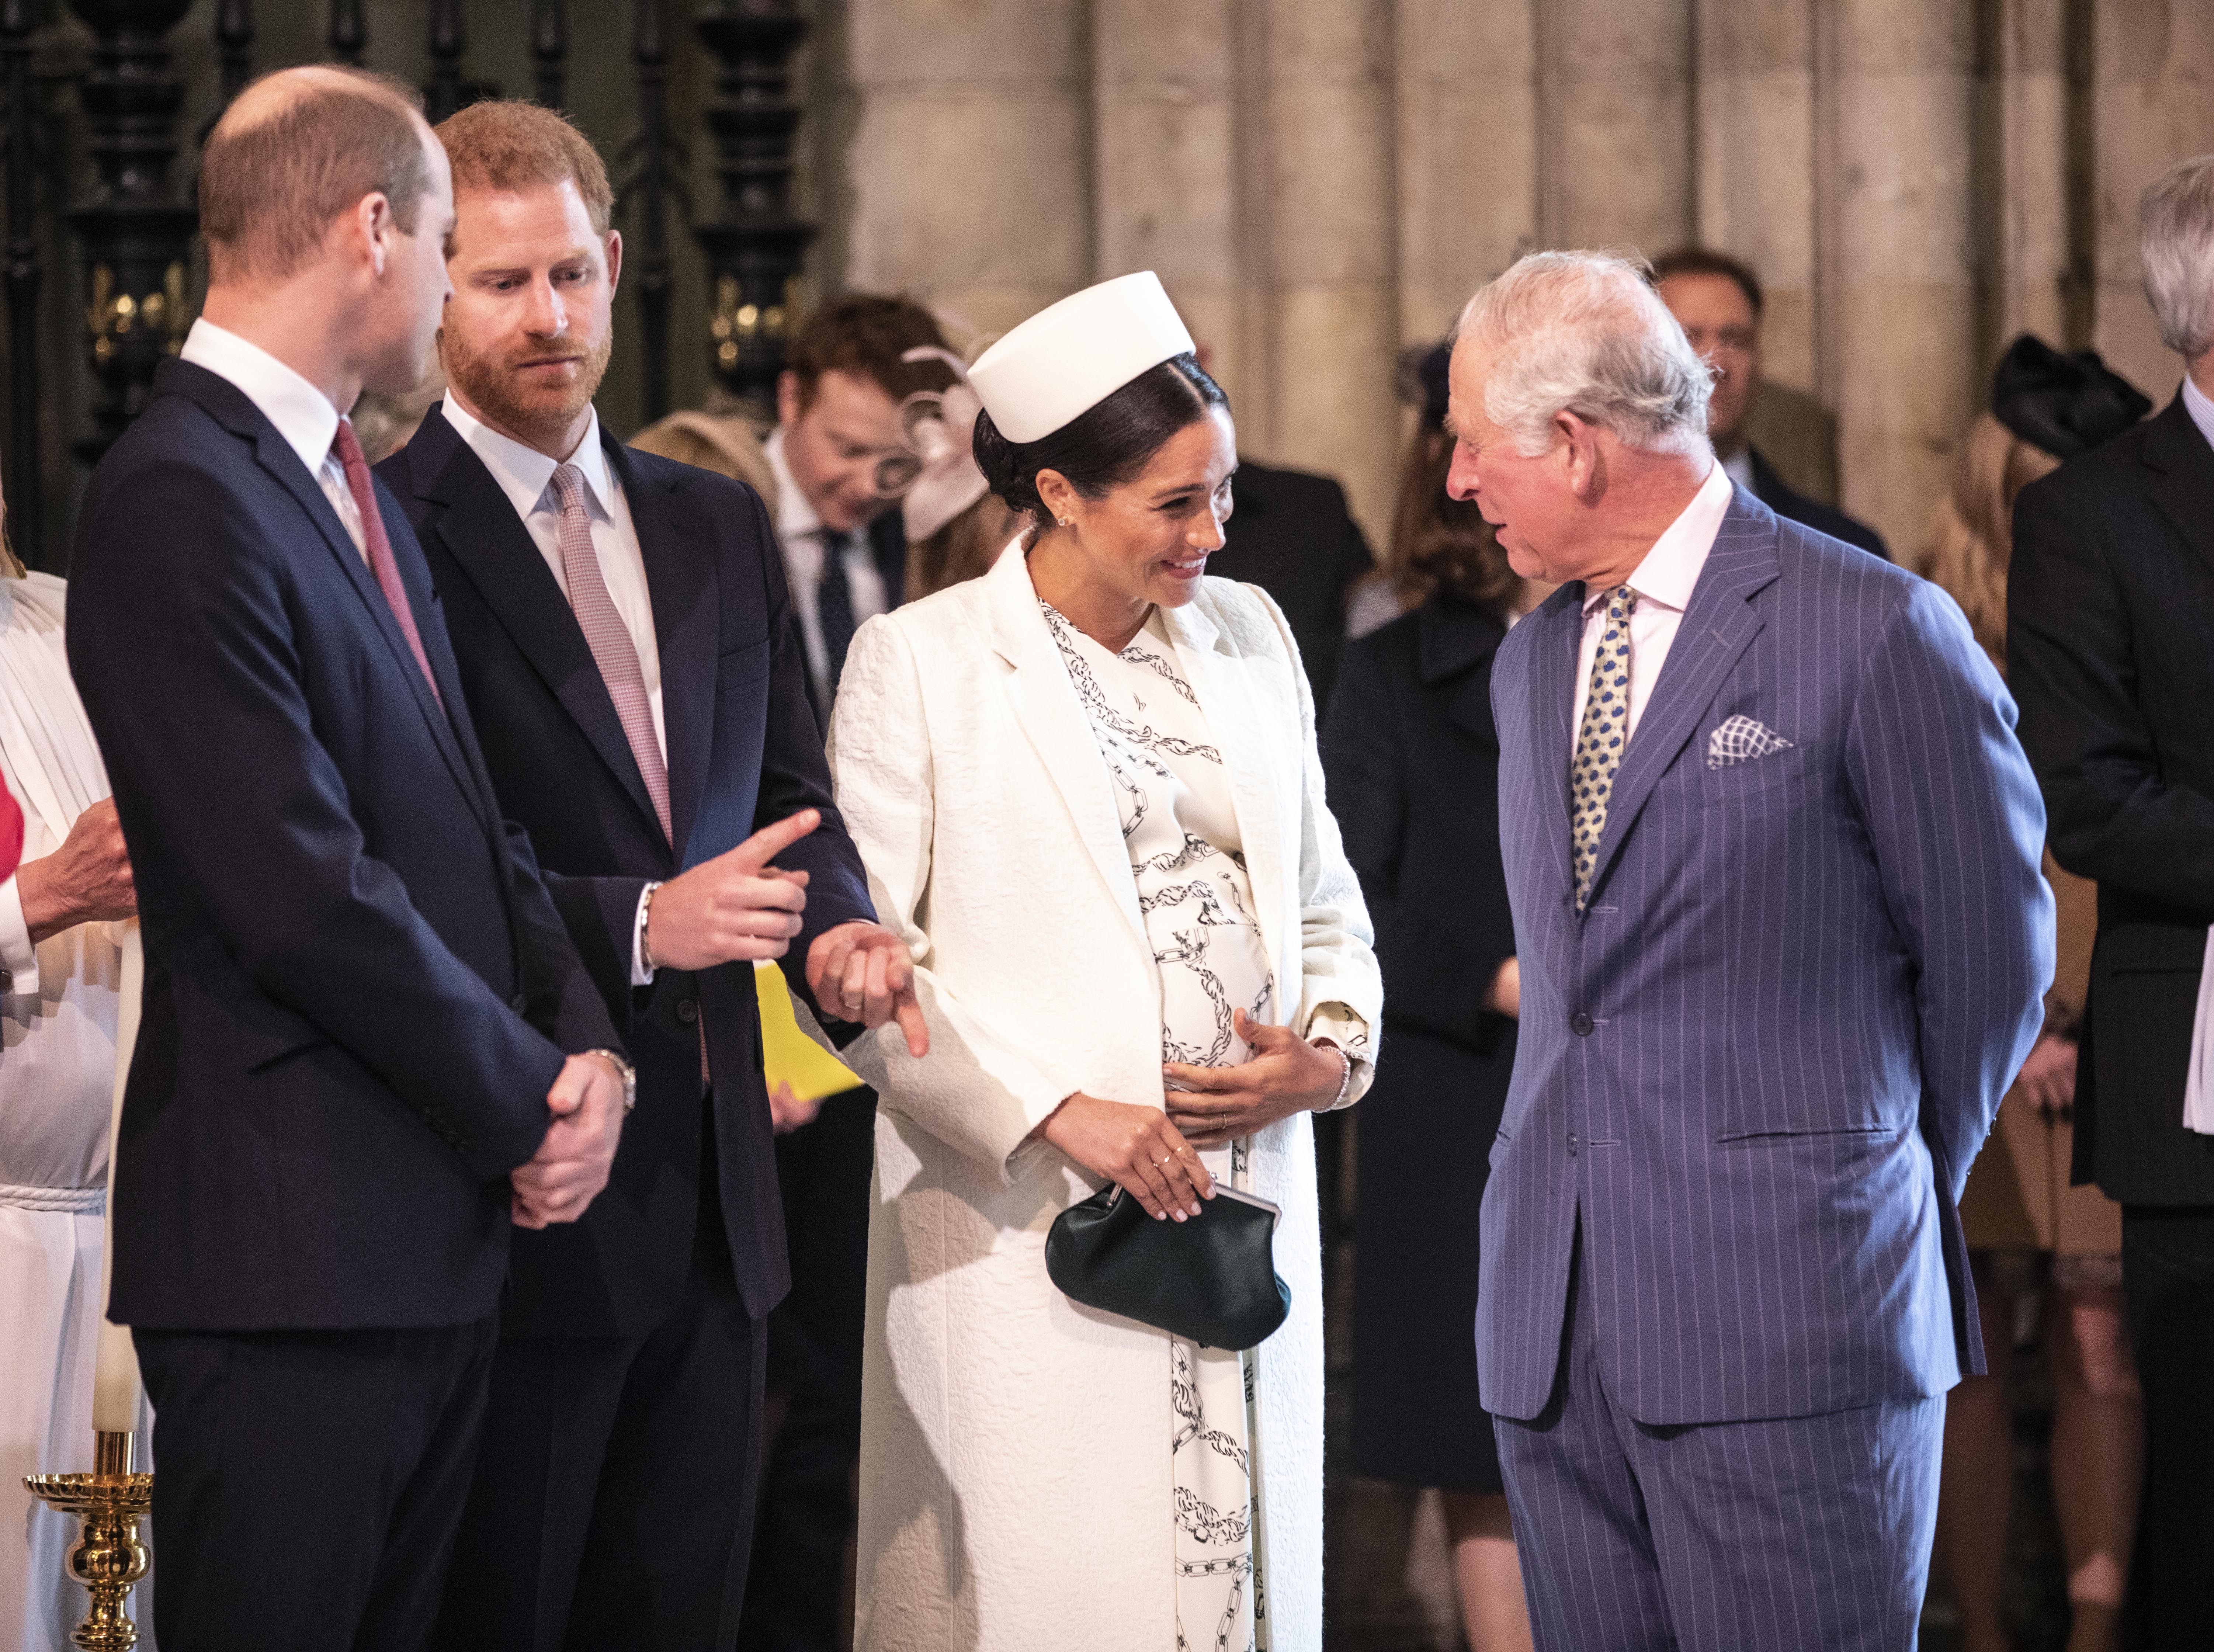 Meghan Markle talks with Prince Charles at the Westminster Abbey Commonwealth day service on March 11, 2019 in London, England. | Source: Getty Images